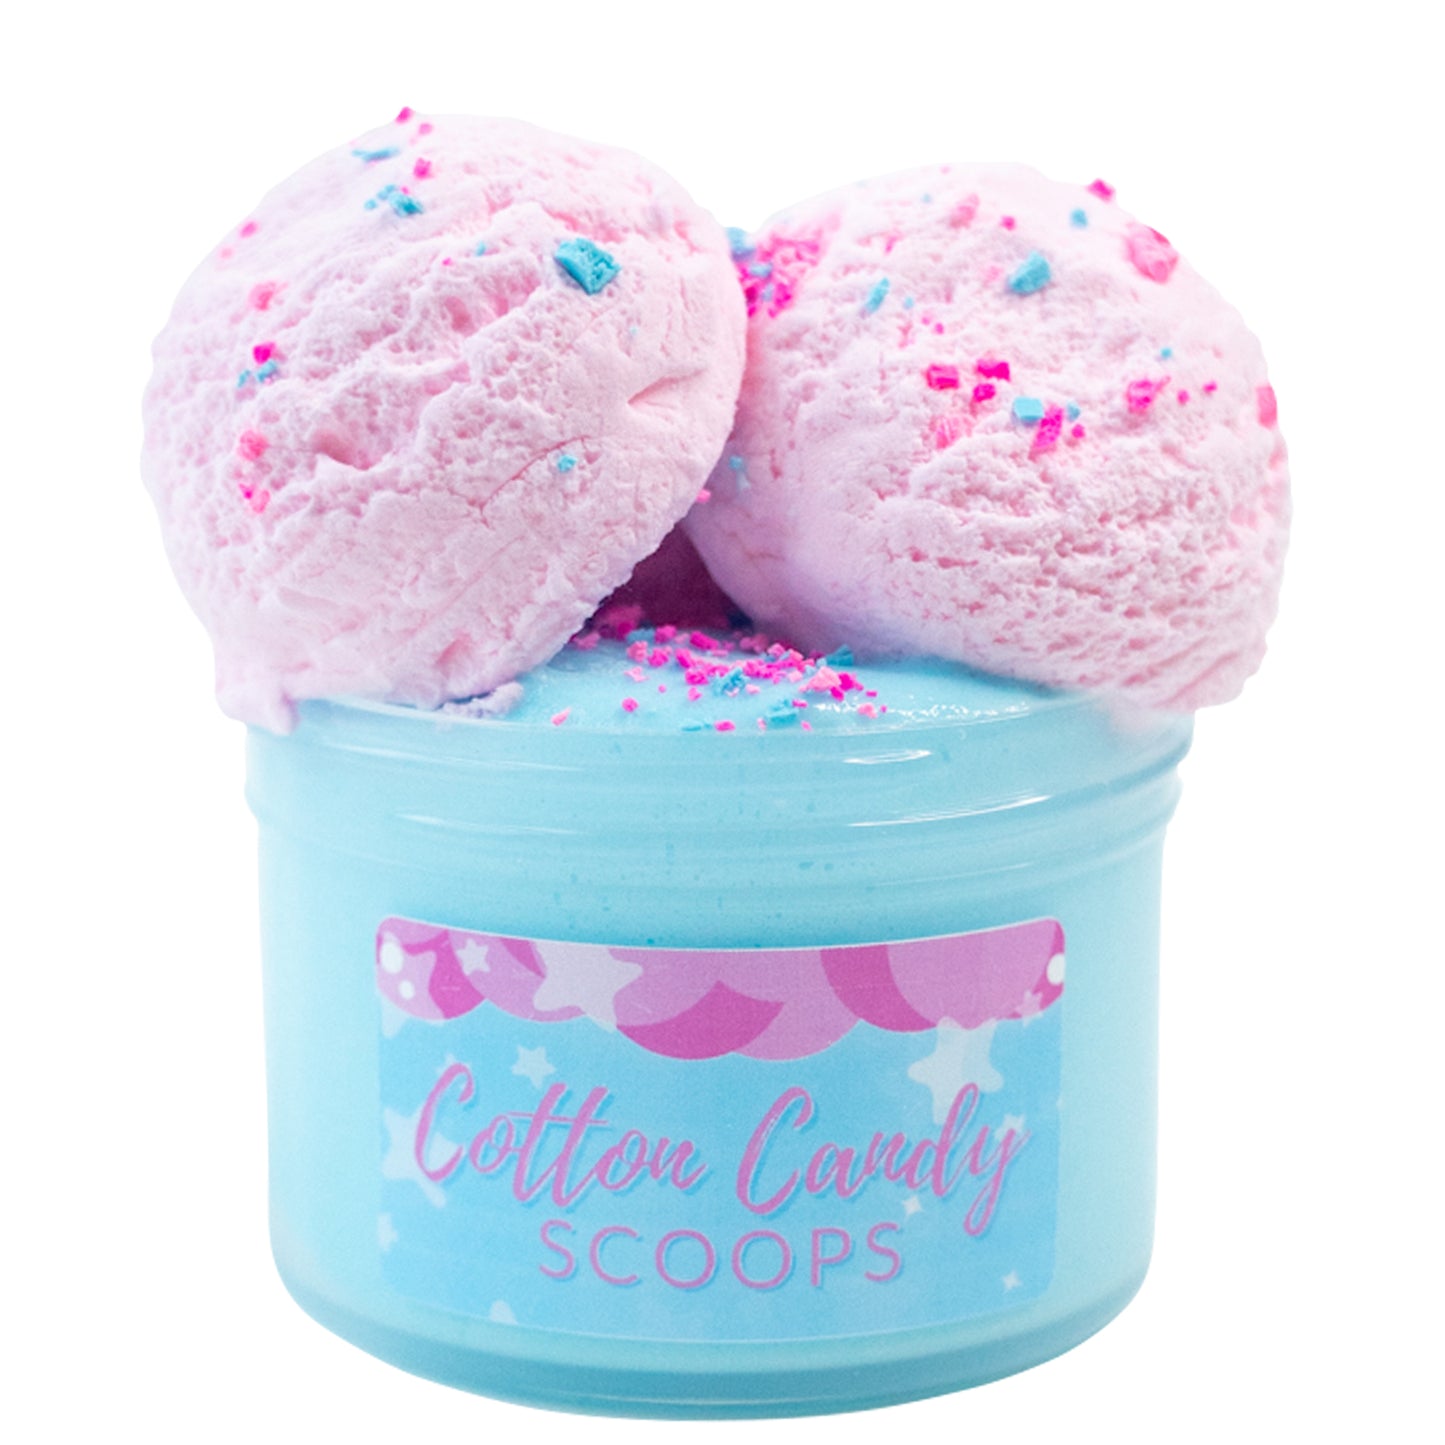 Cotton Candy Scoops